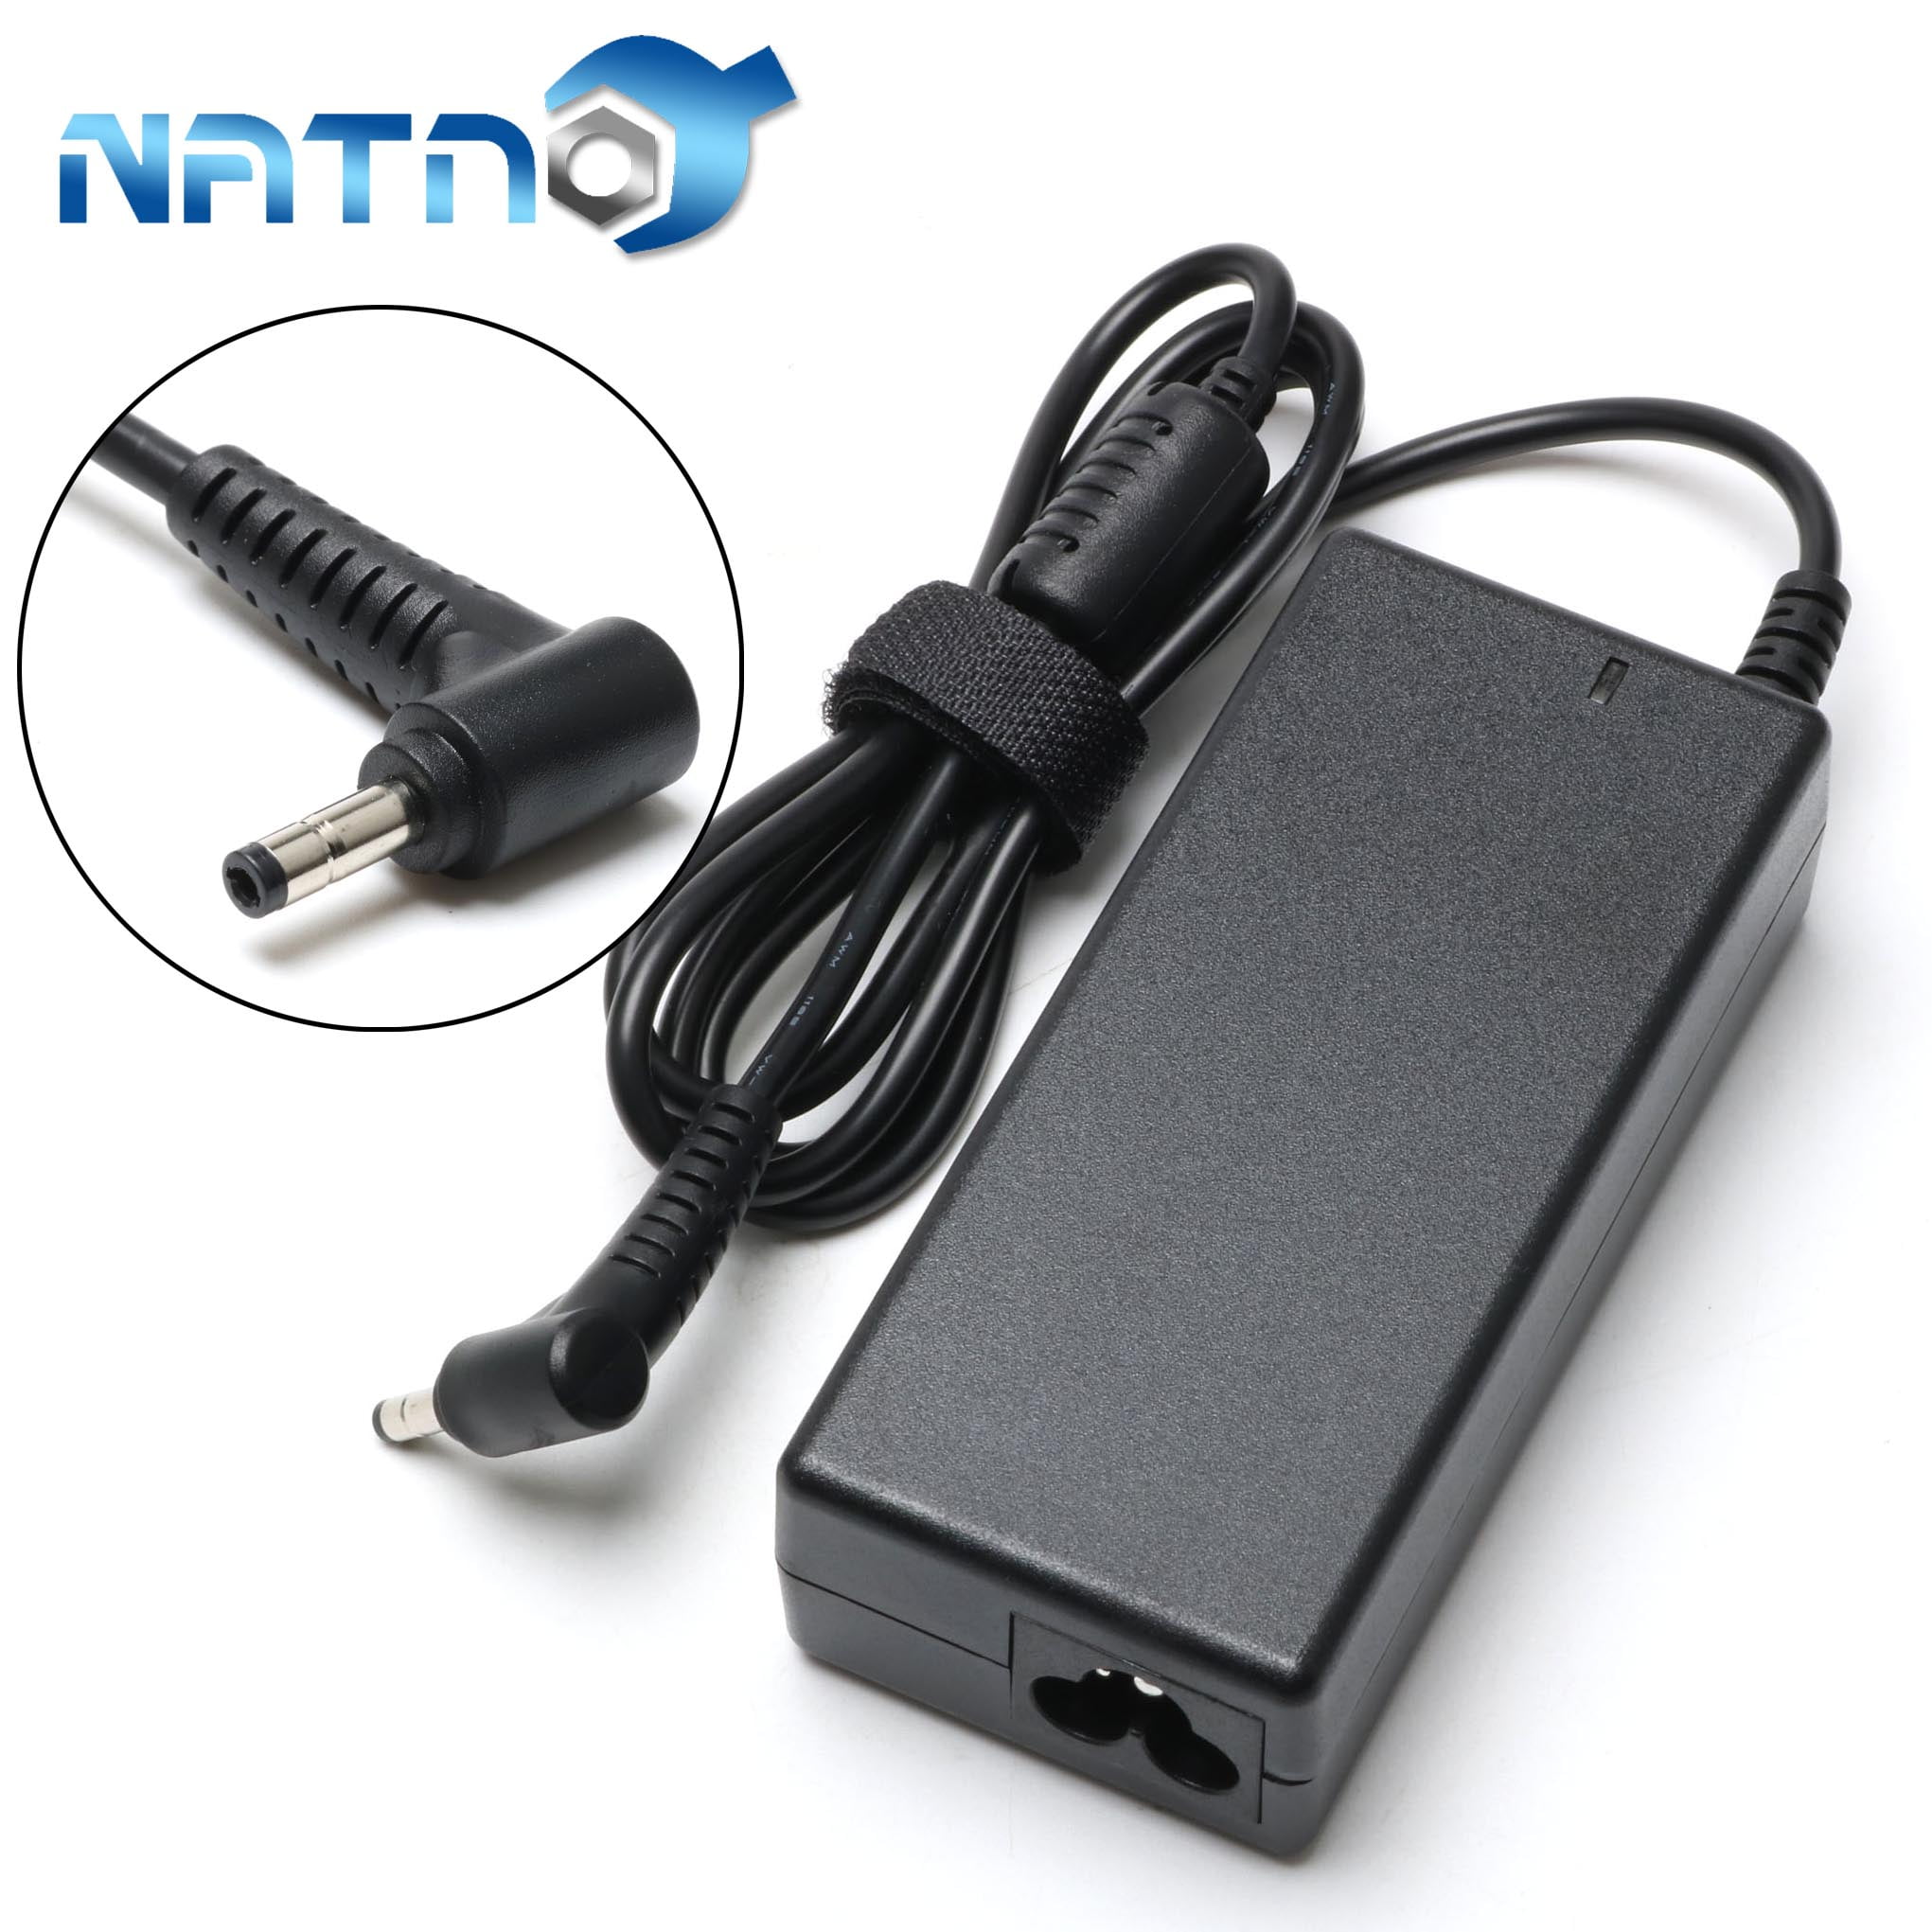  Charger for Lenovo Ideapad Laptop Charger, (Safety Certified by  UL), 65W 45W : Electronics